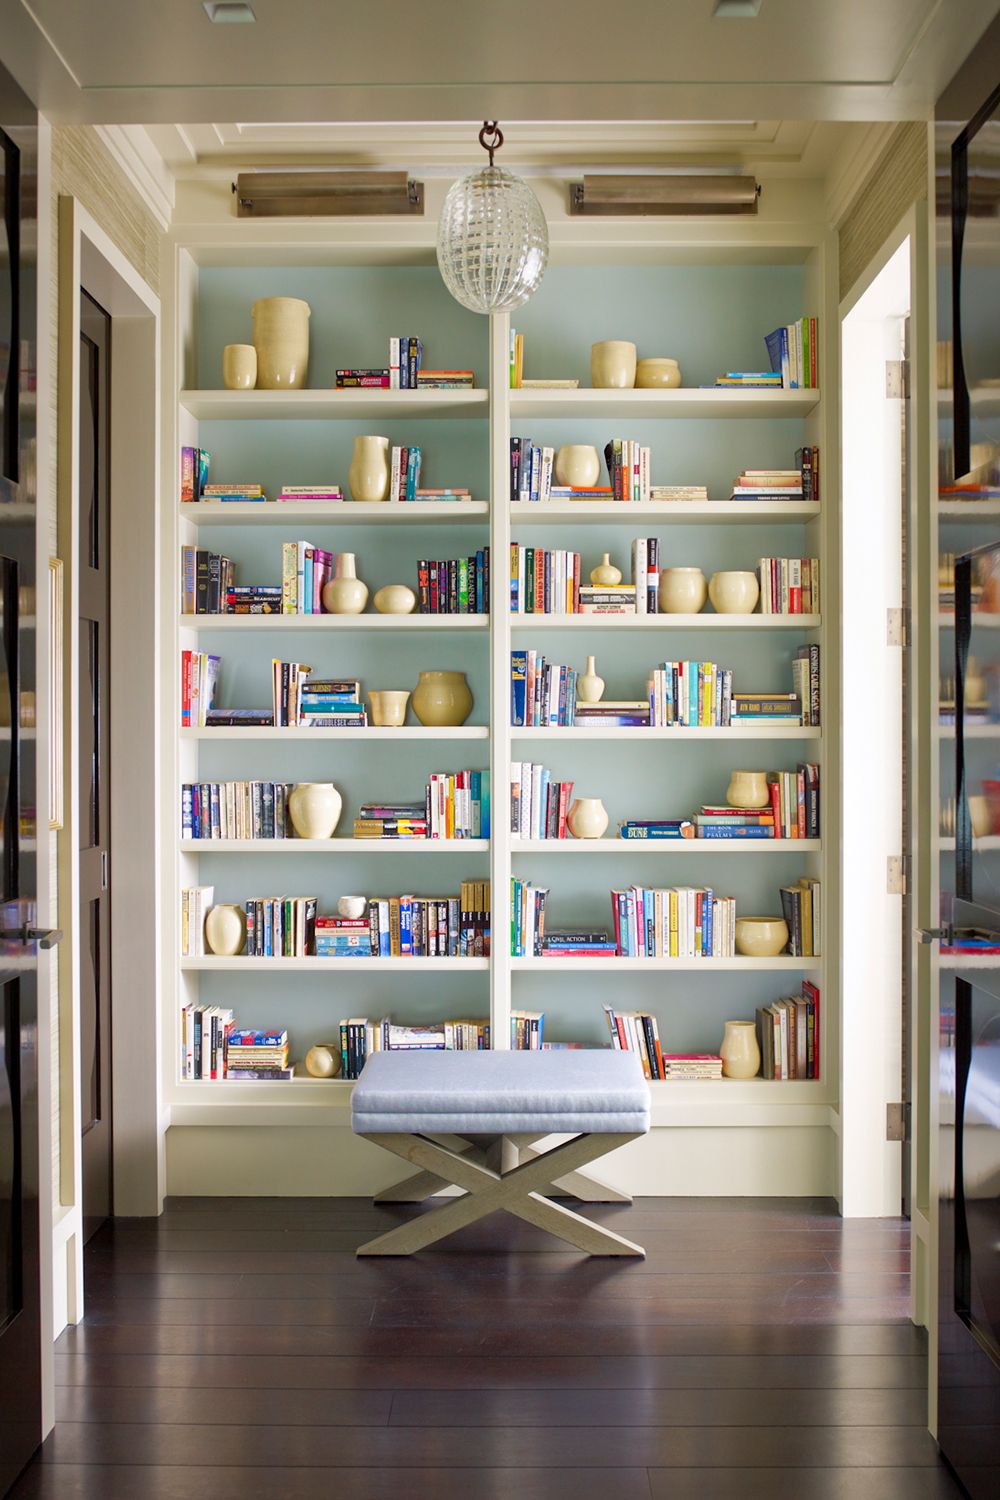 Floor To Ceiling Shelving Ideas, Built In Shelving Units